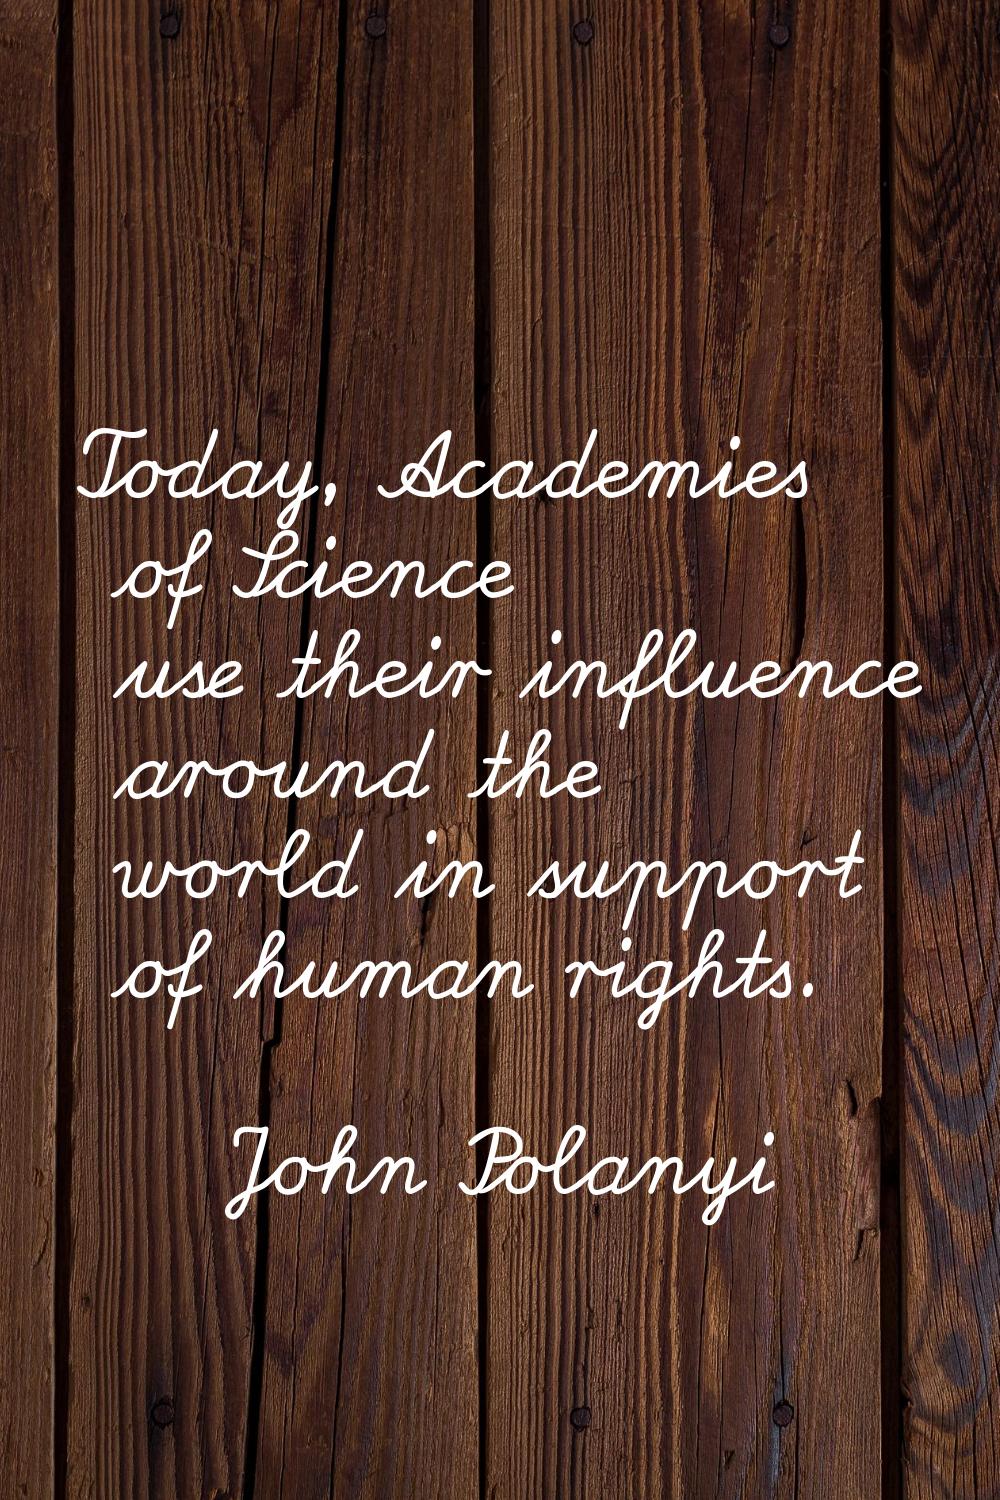 Today, Academies of Science use their influence around the world in support of human rights.